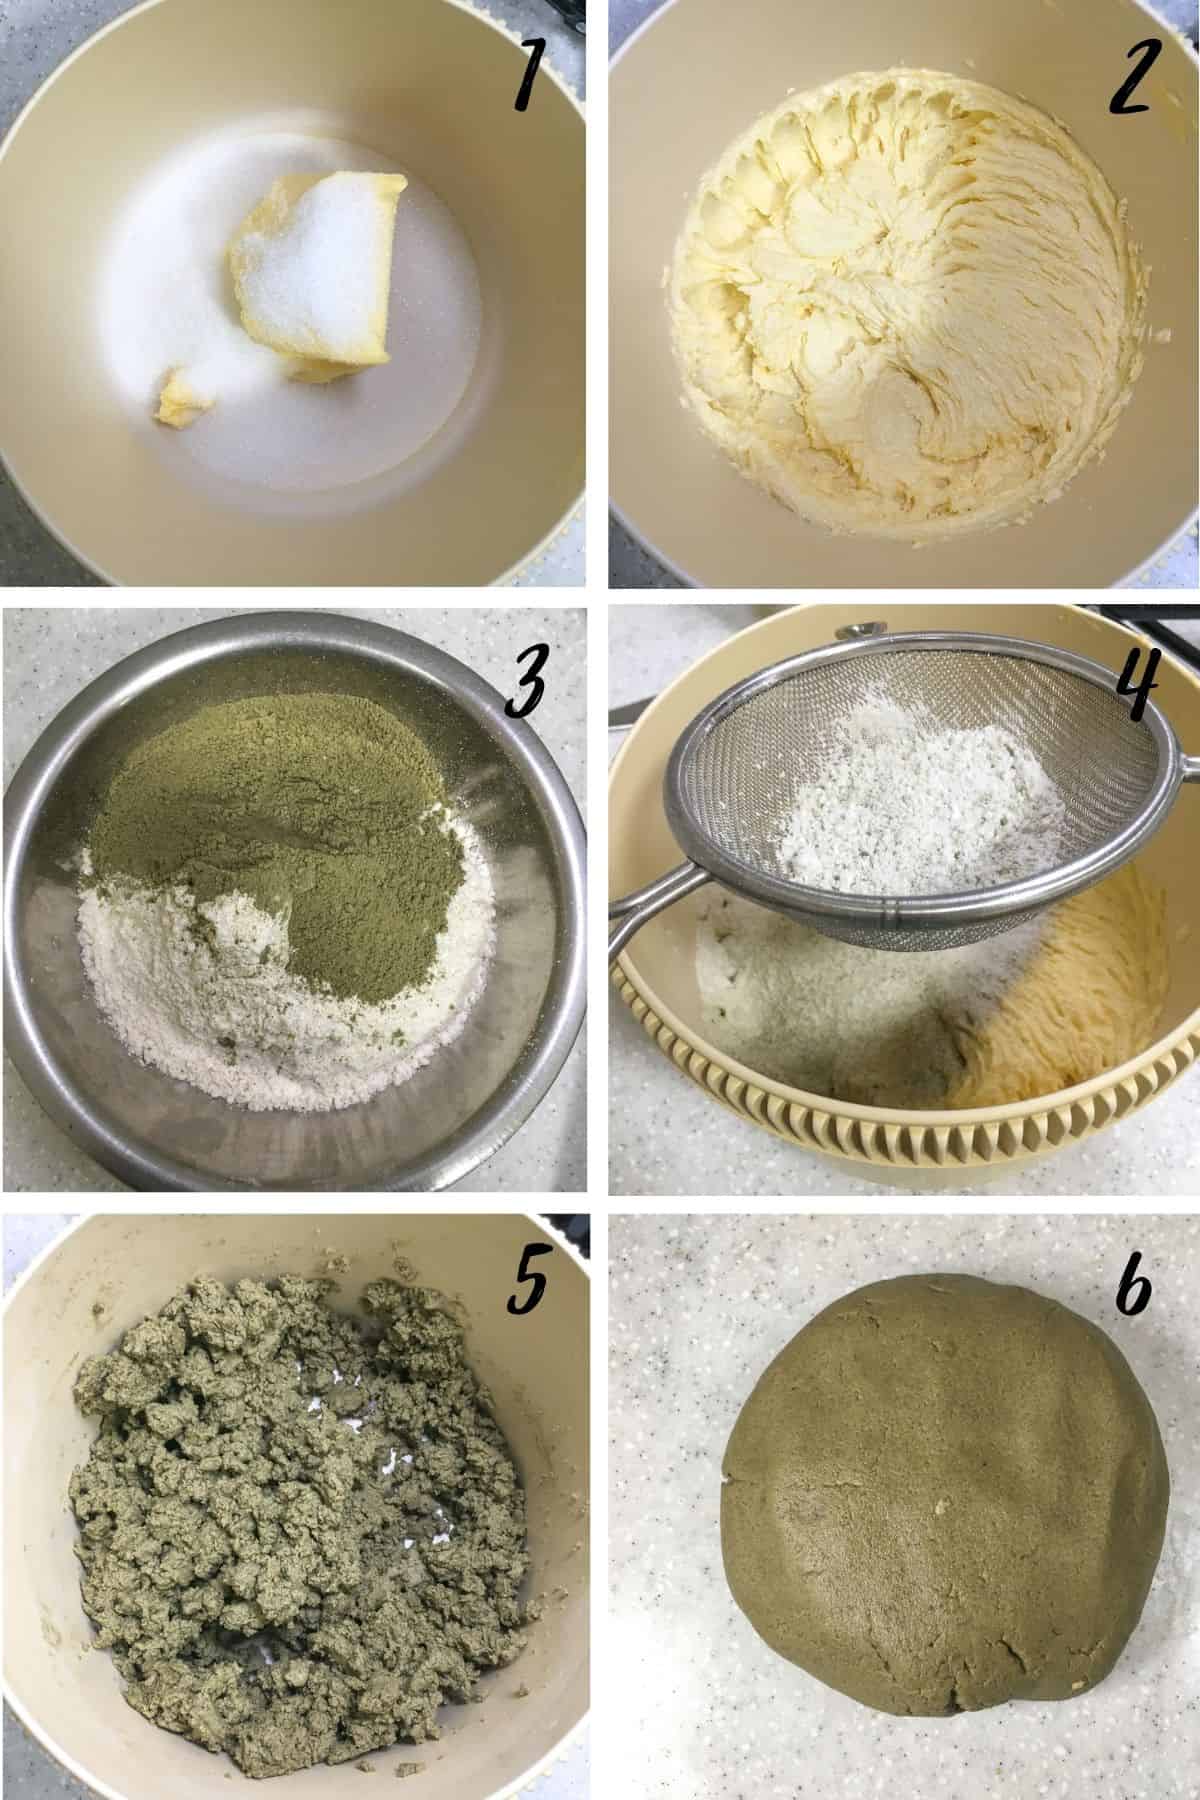 A poster of 6 images showing how to make cookies with matcha powder.